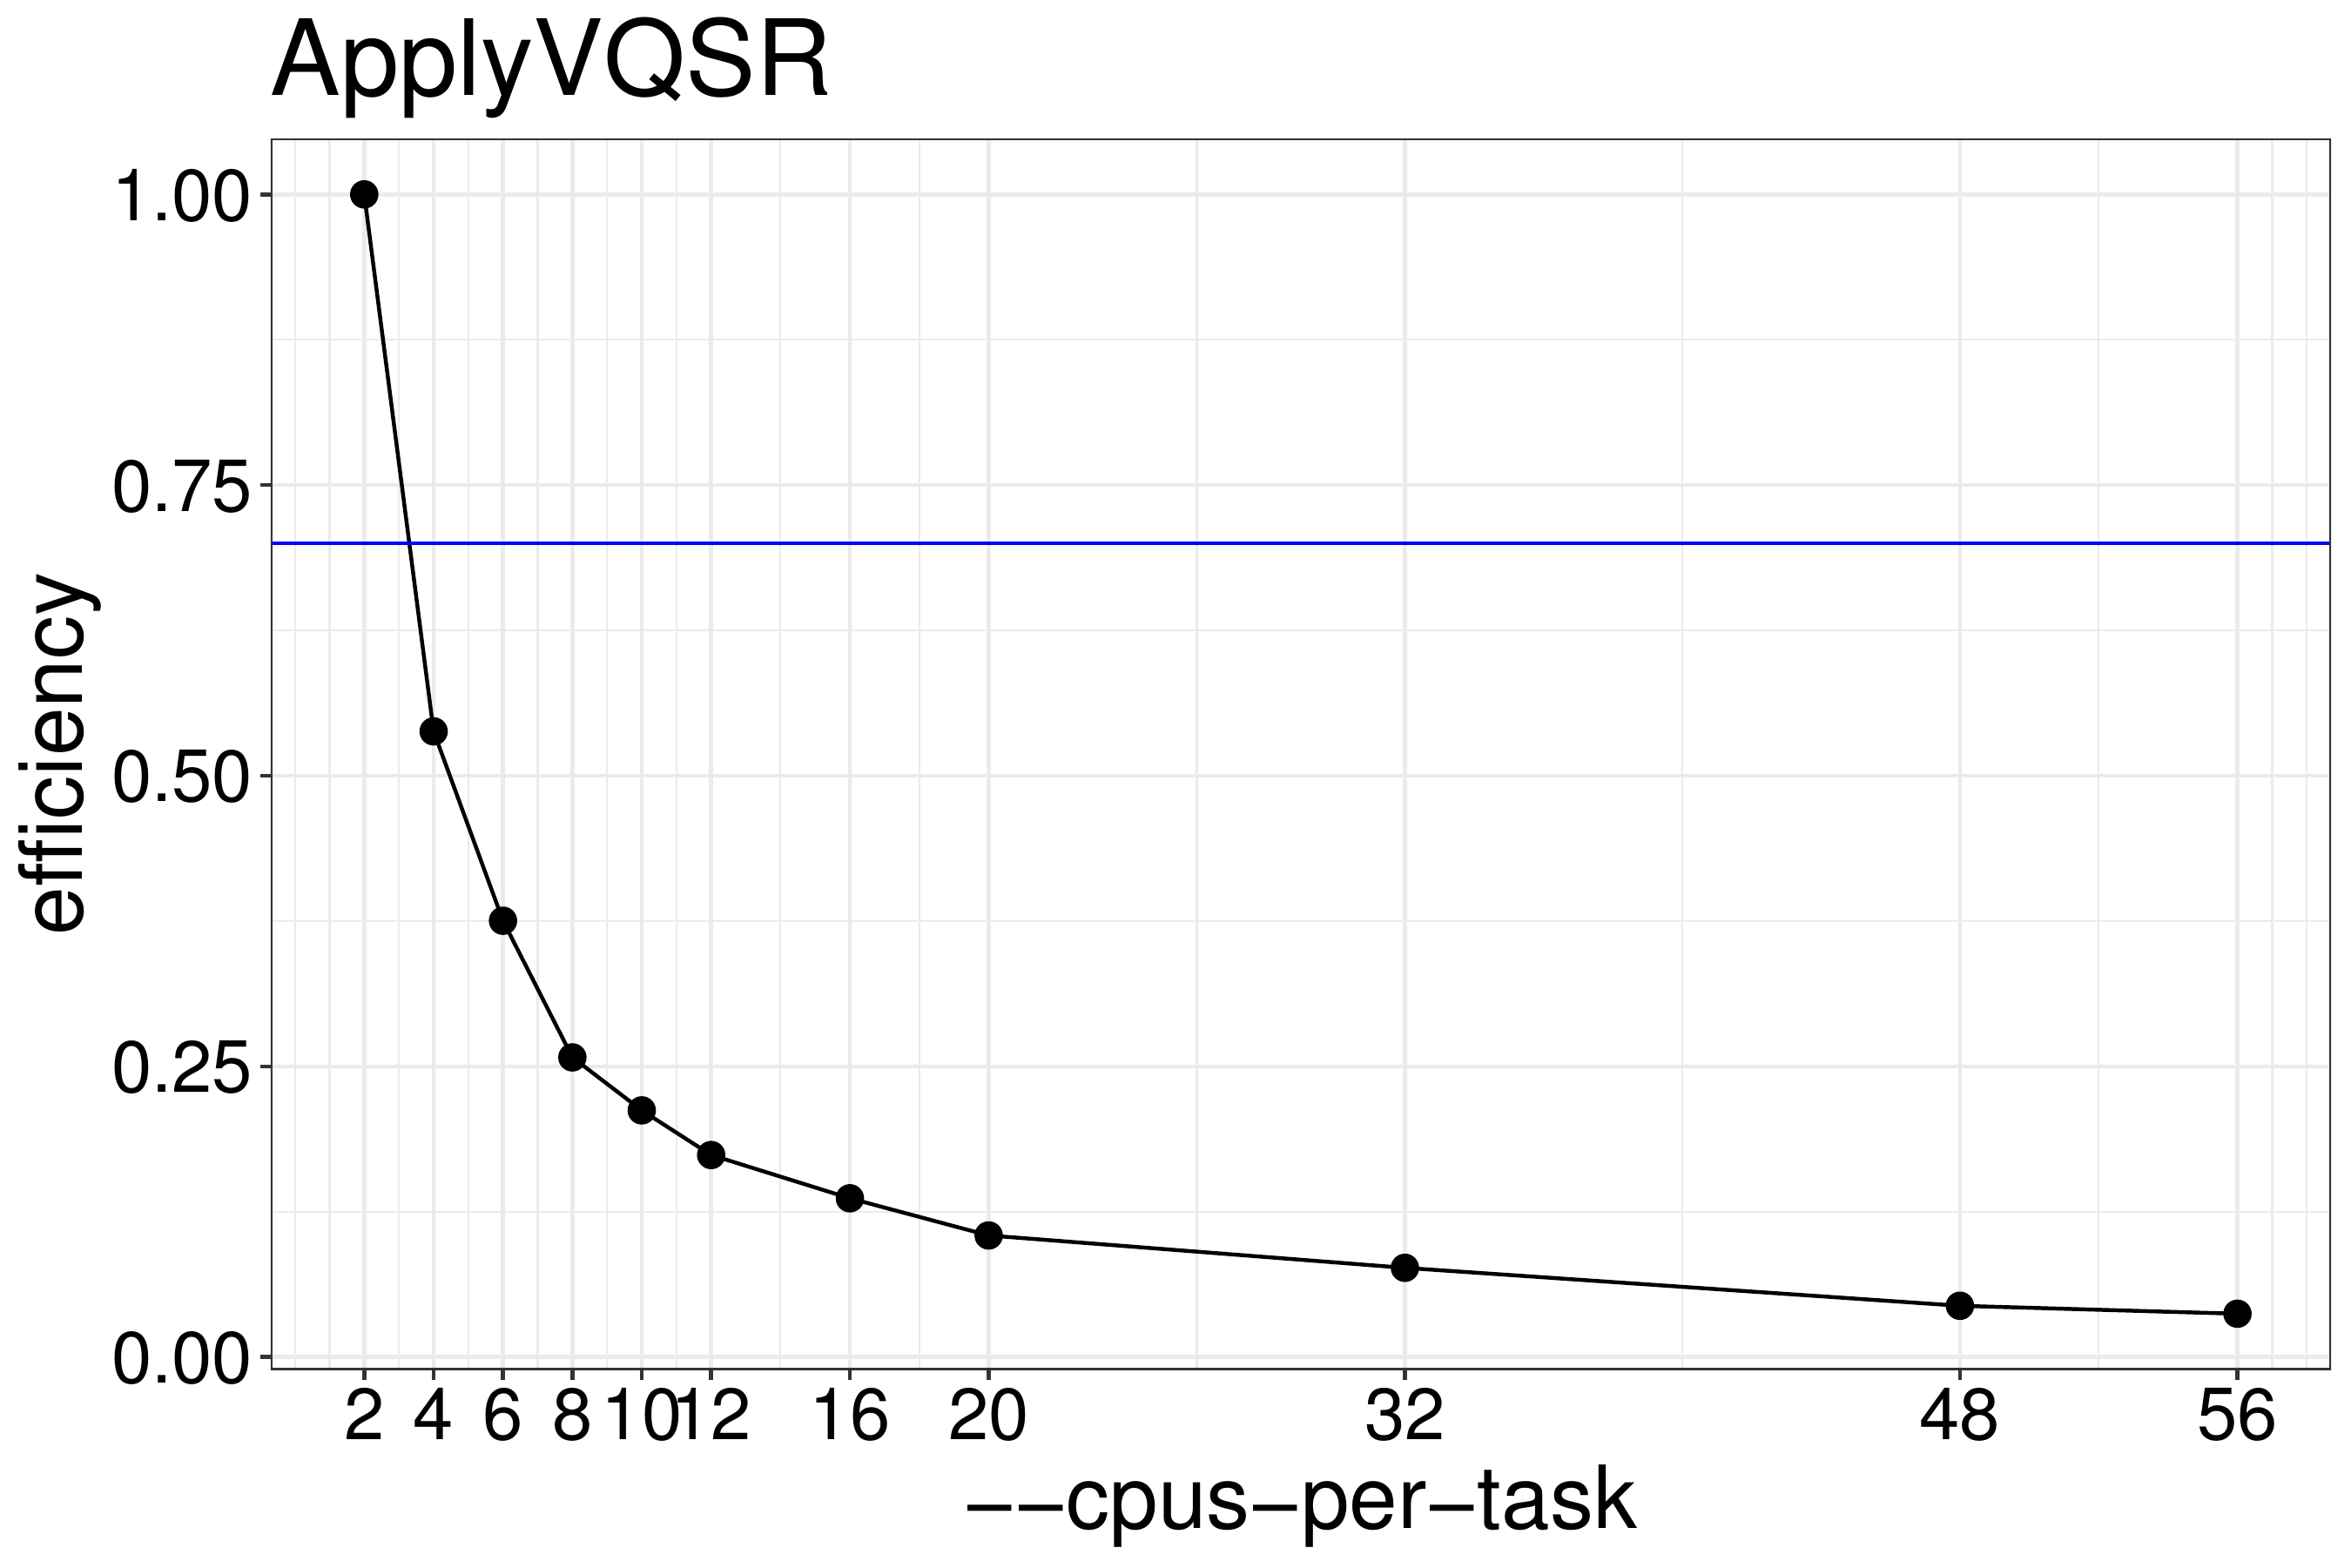 Efficiency of ApplyVQSR as a function of the number of threads